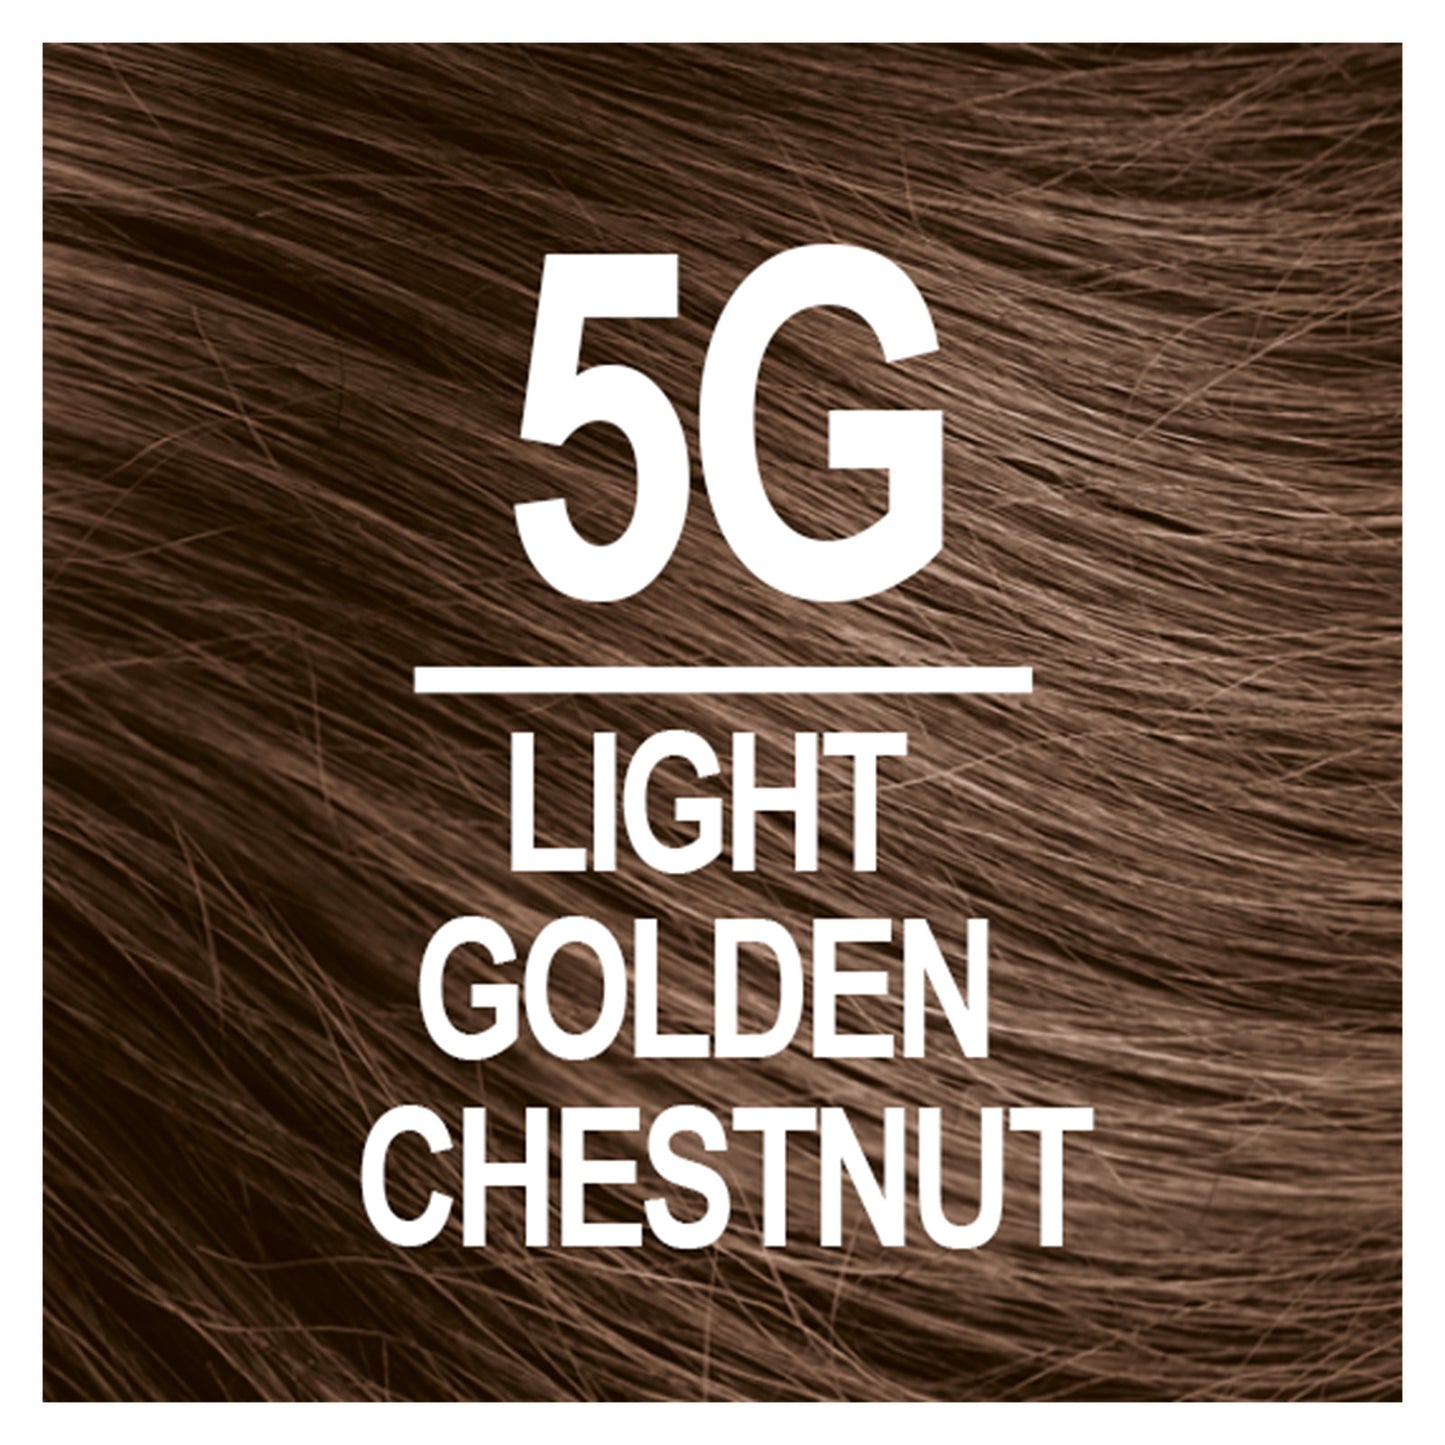 Naturtint Permanent Hair Color 5G Light Golden Chestnut (Packaging may vary)